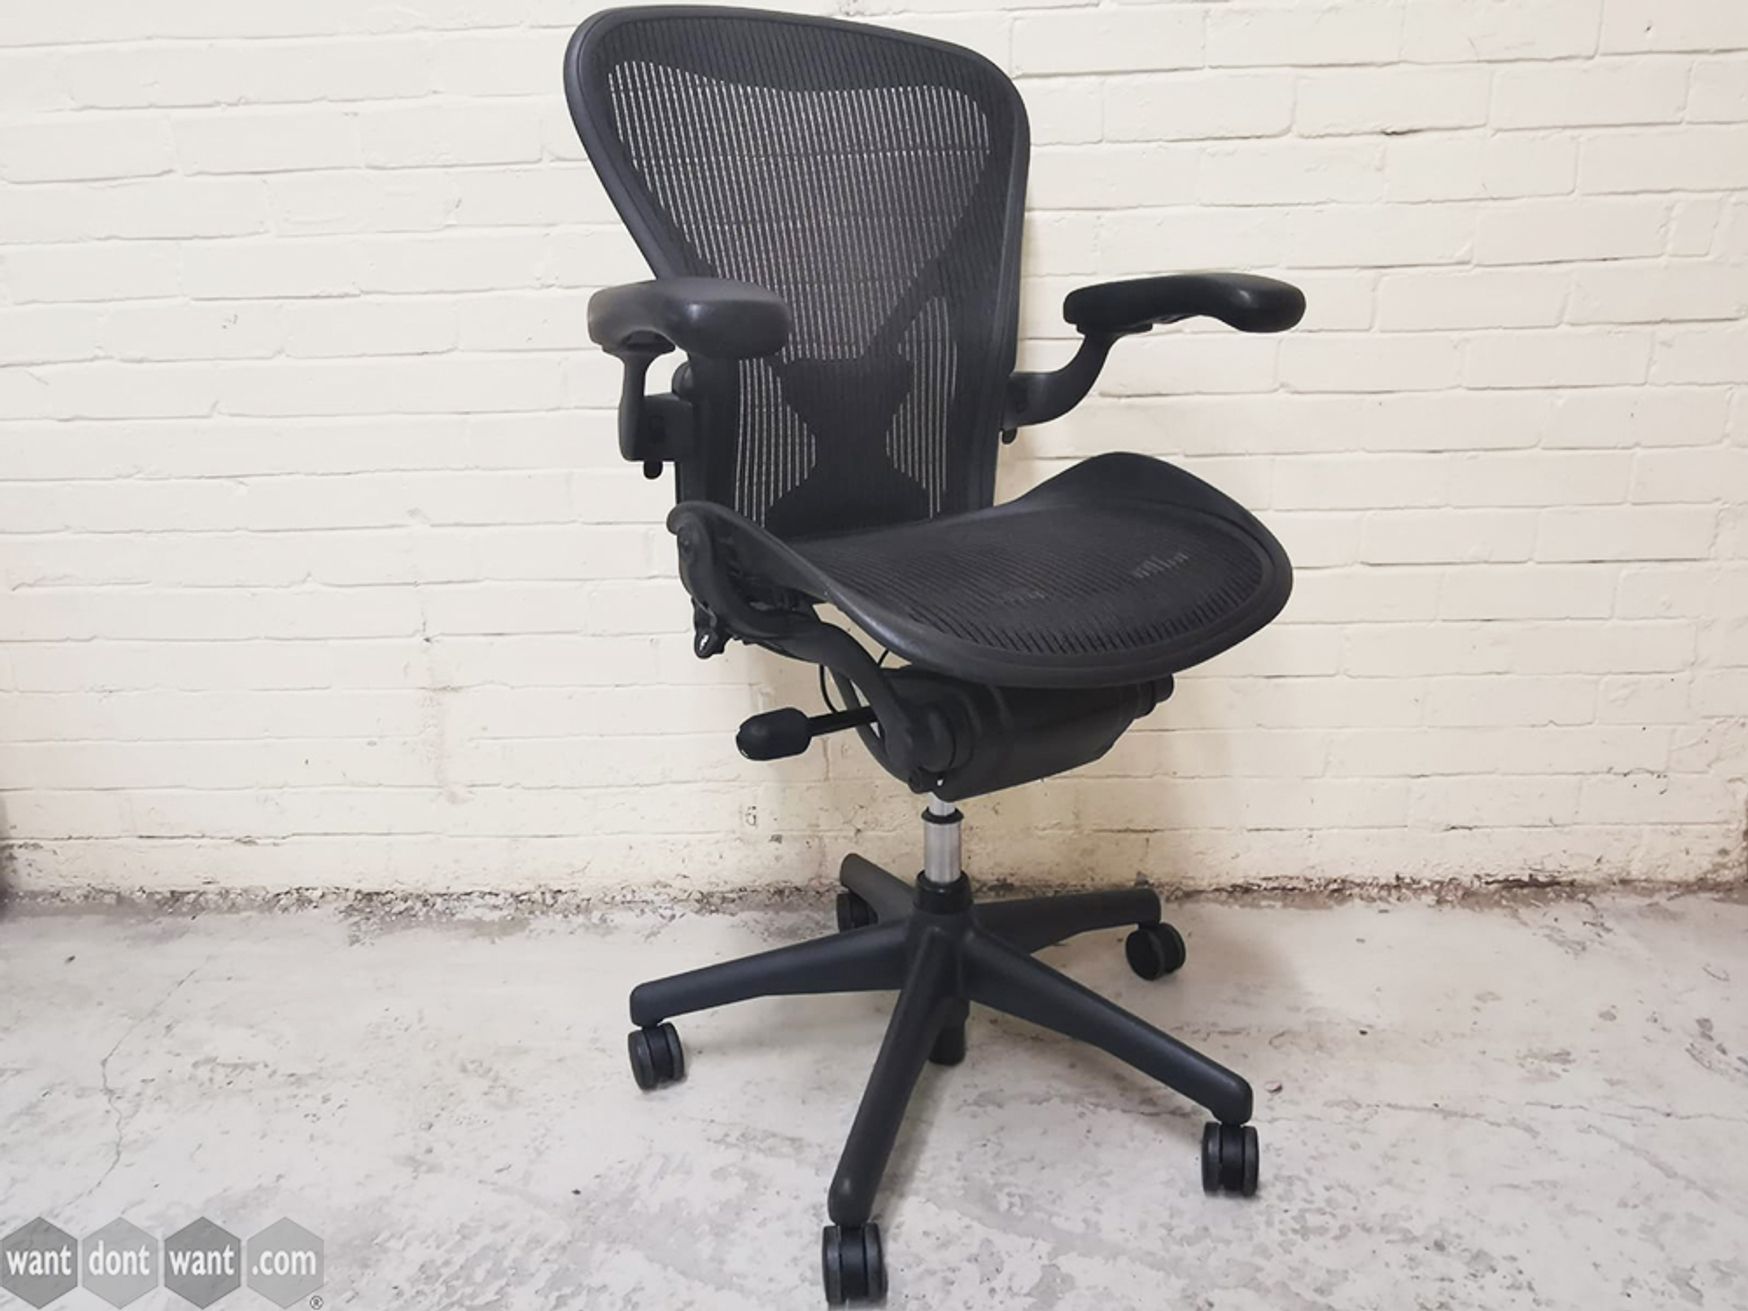 Used Size B Herman Miller Aeron Chairs in Graphite with PostureFit Lumbar Support